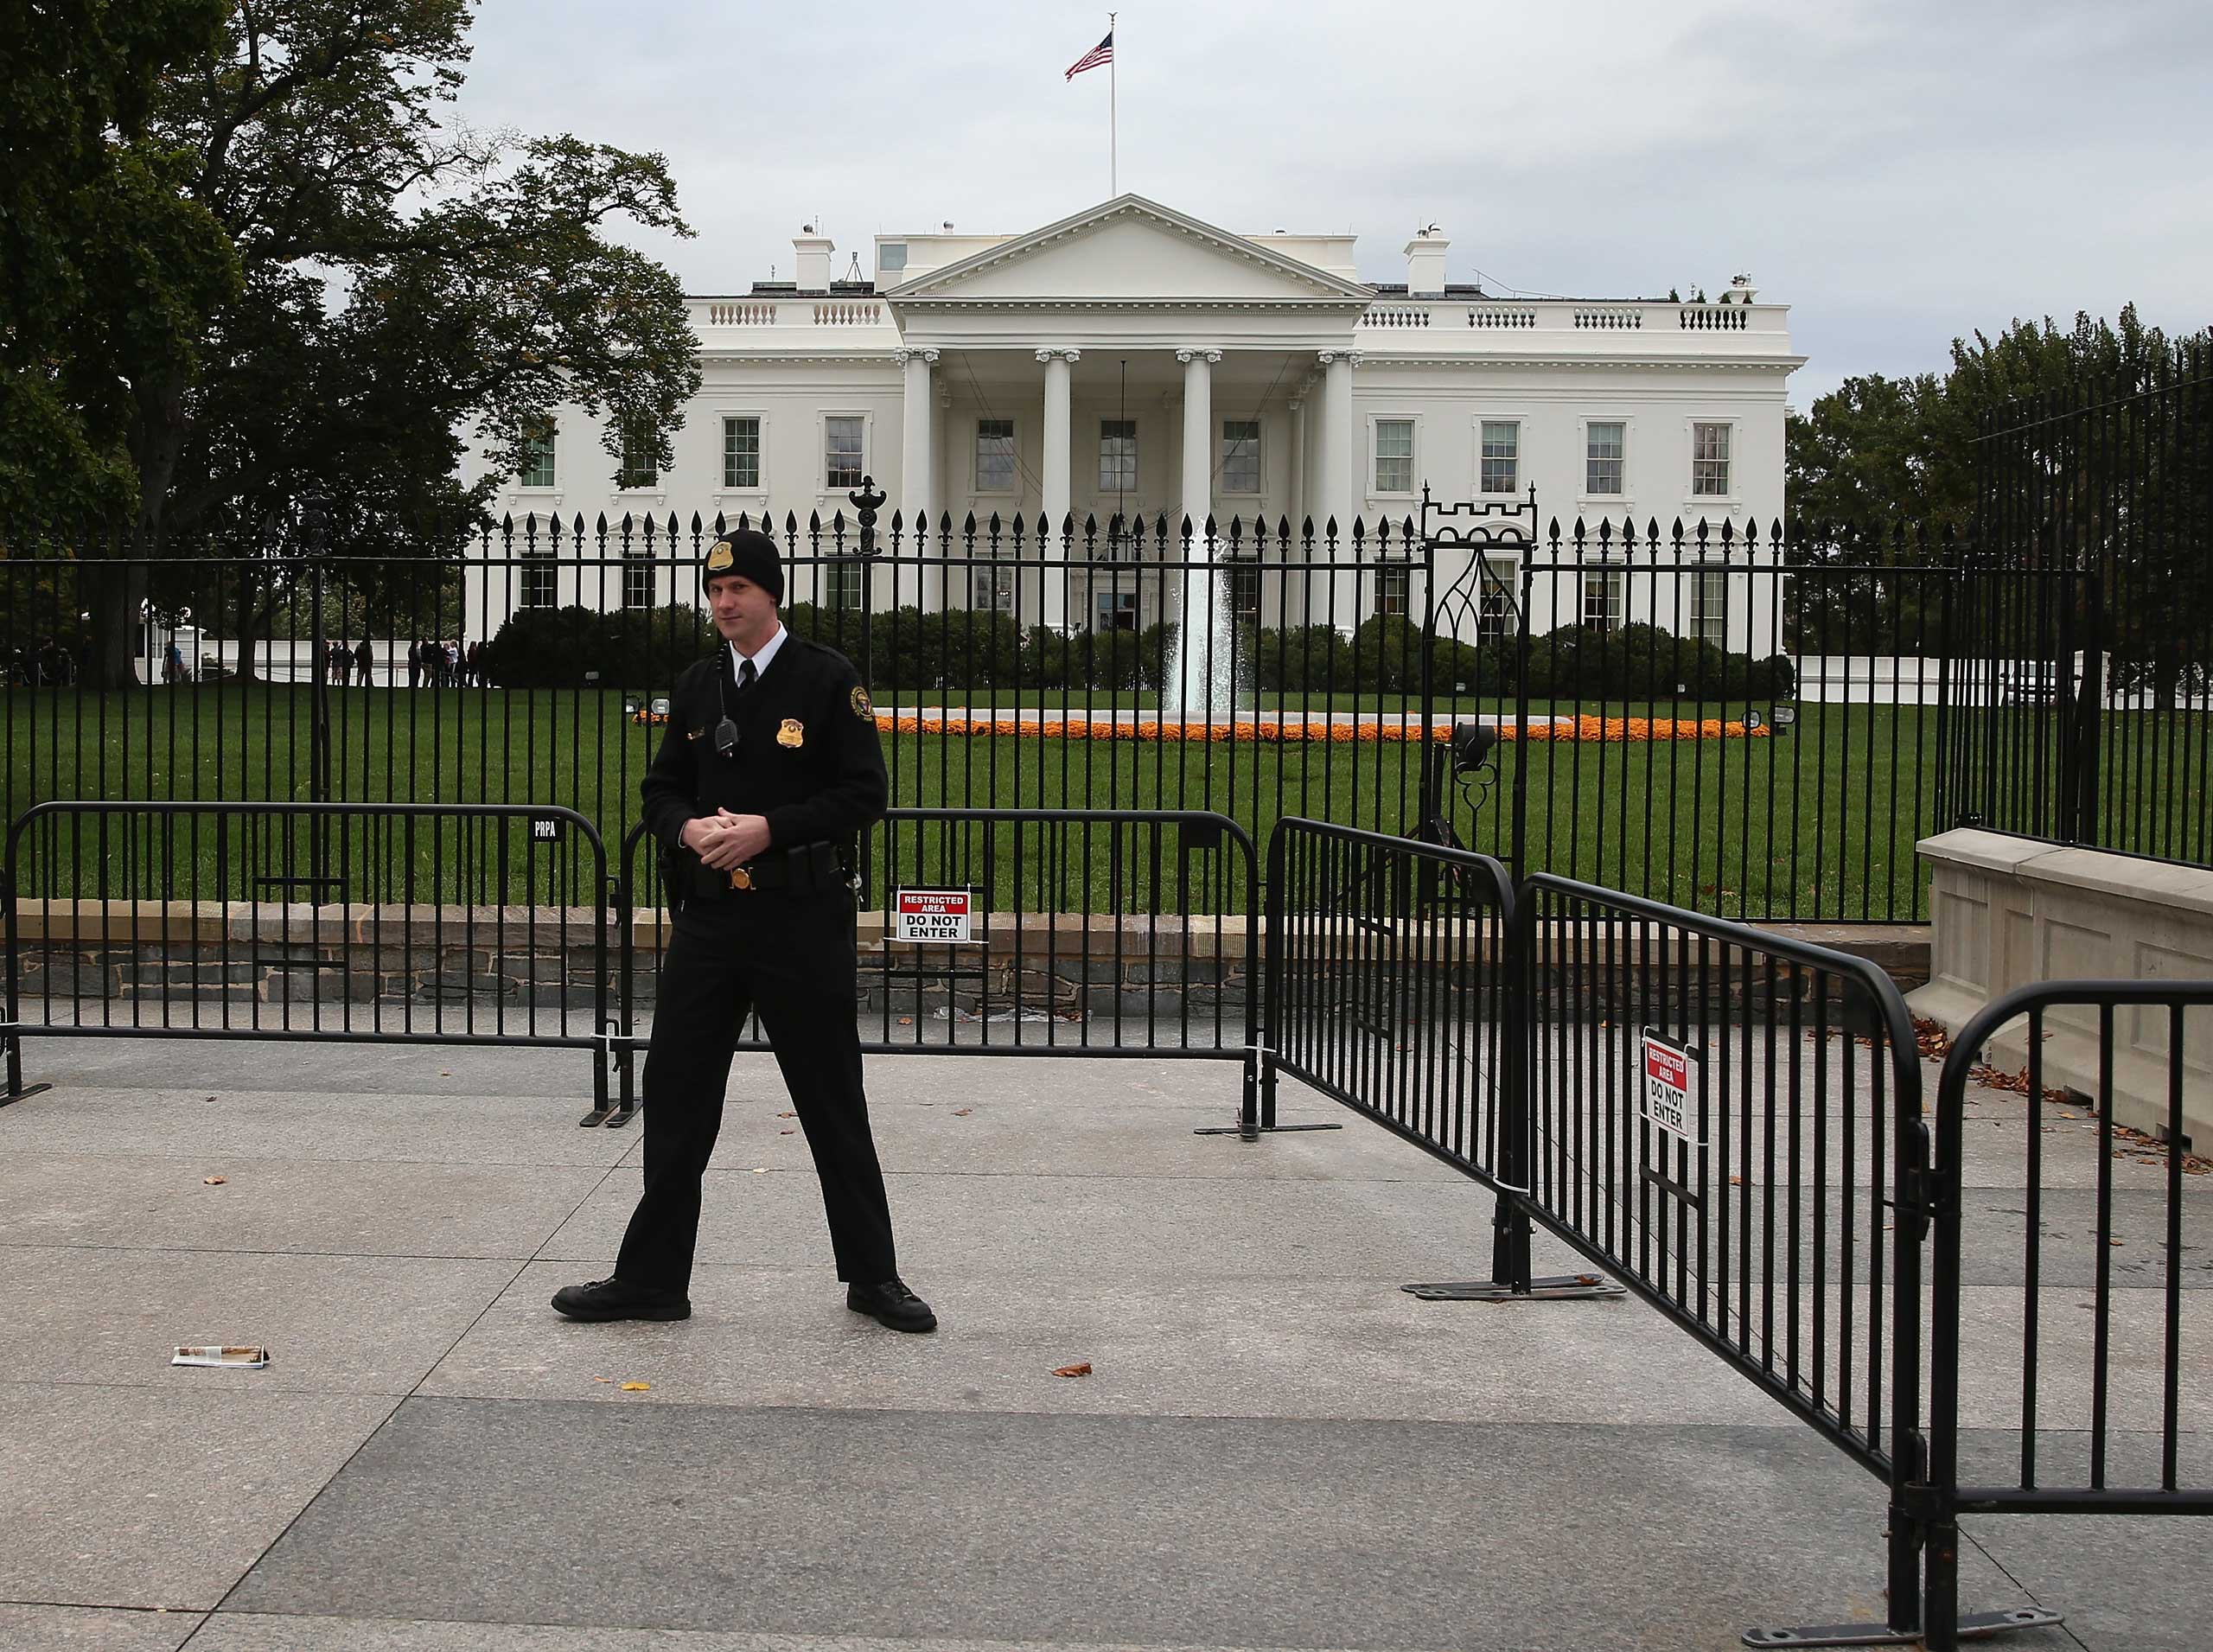 A member of the US Secret Service stands guard in front of the White House in Washington on Oct. 23, 2014. (Mark Wilson—Getty Images)